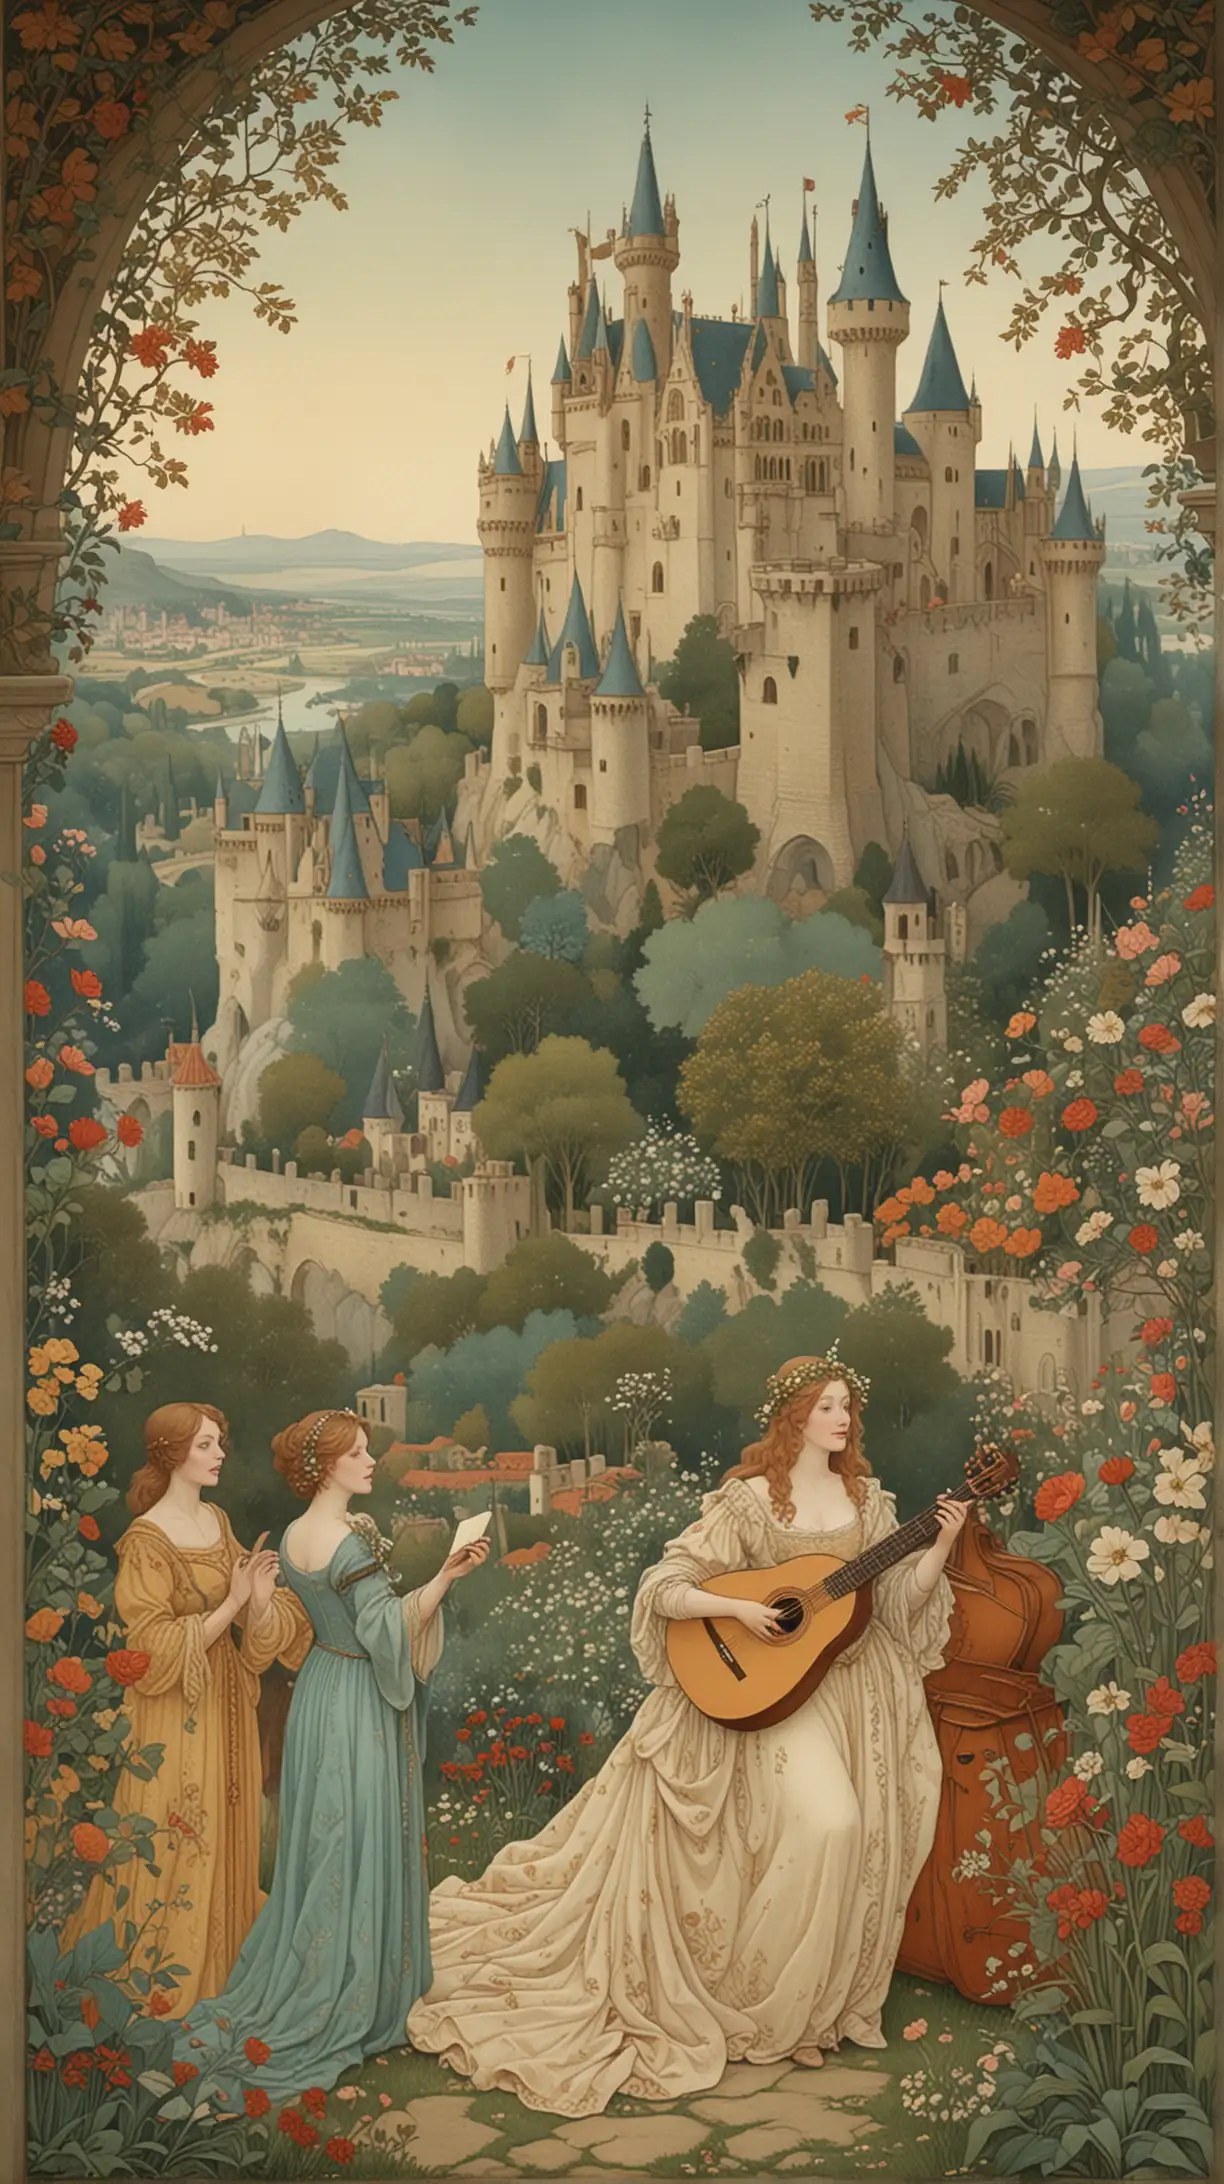 Medieval Troubadour Serenading Lady and Attendants in Castle Garden